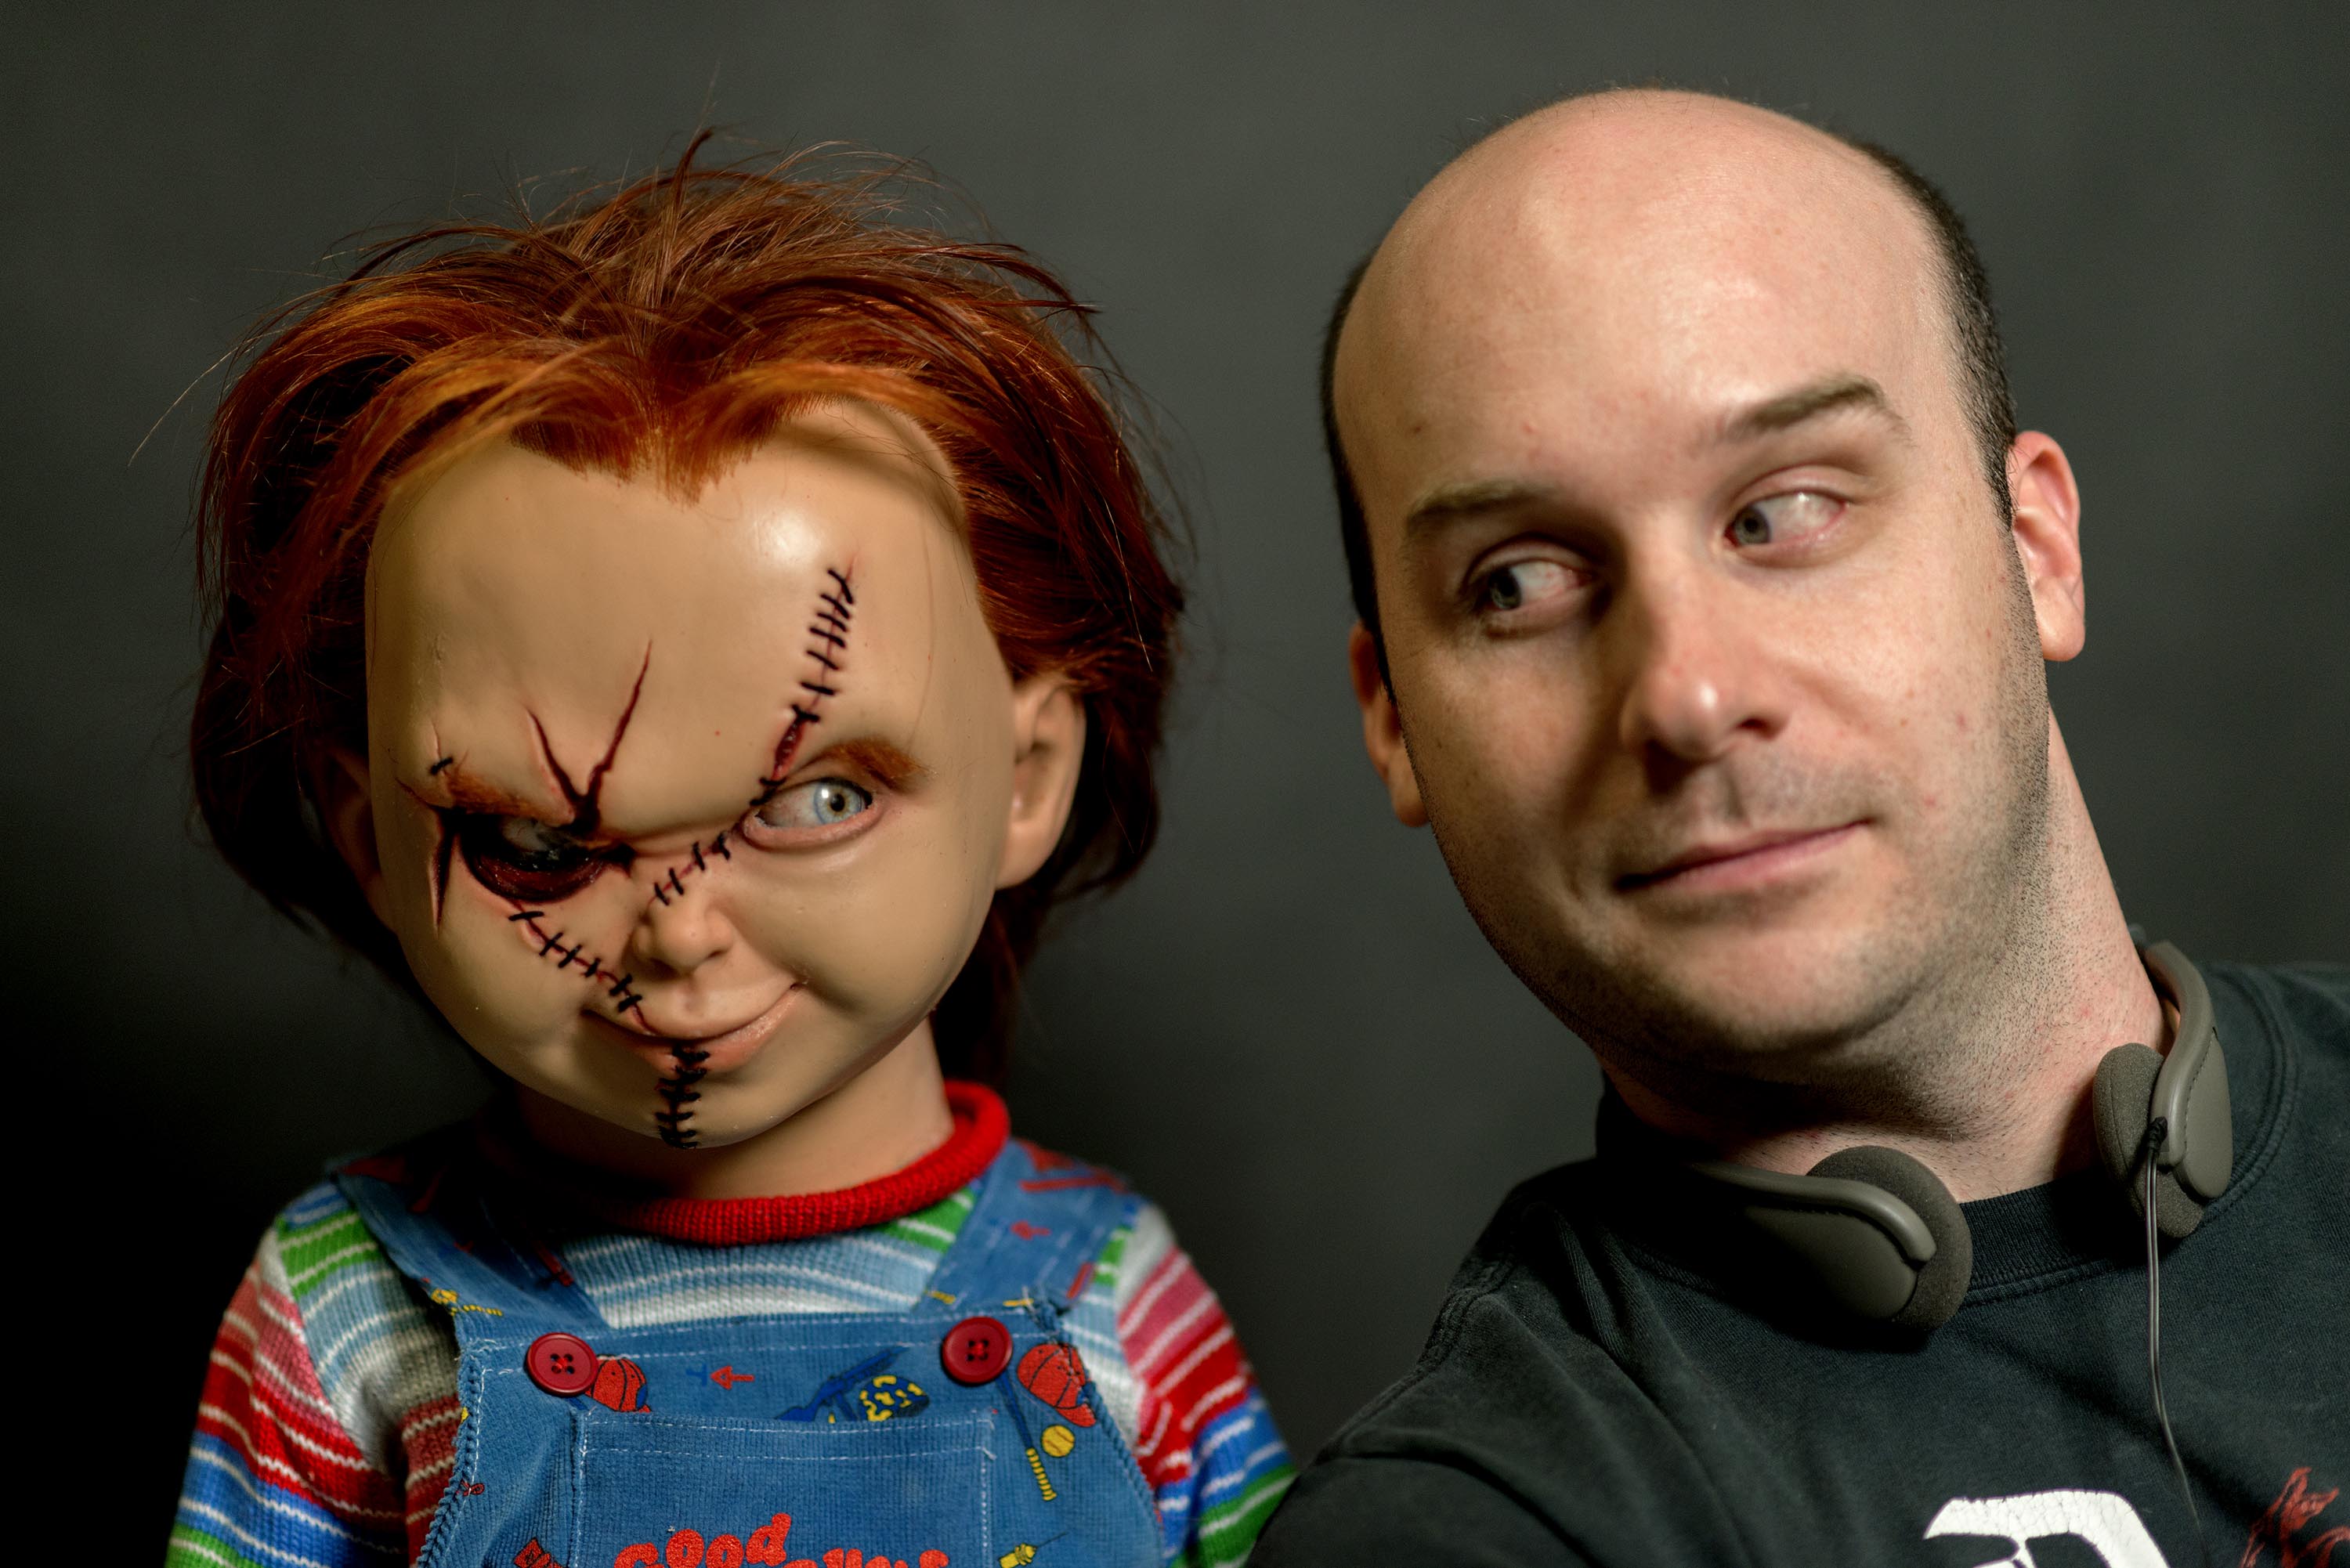 Chucky and director-producer Jack Bennett too close for comfort on the set of 